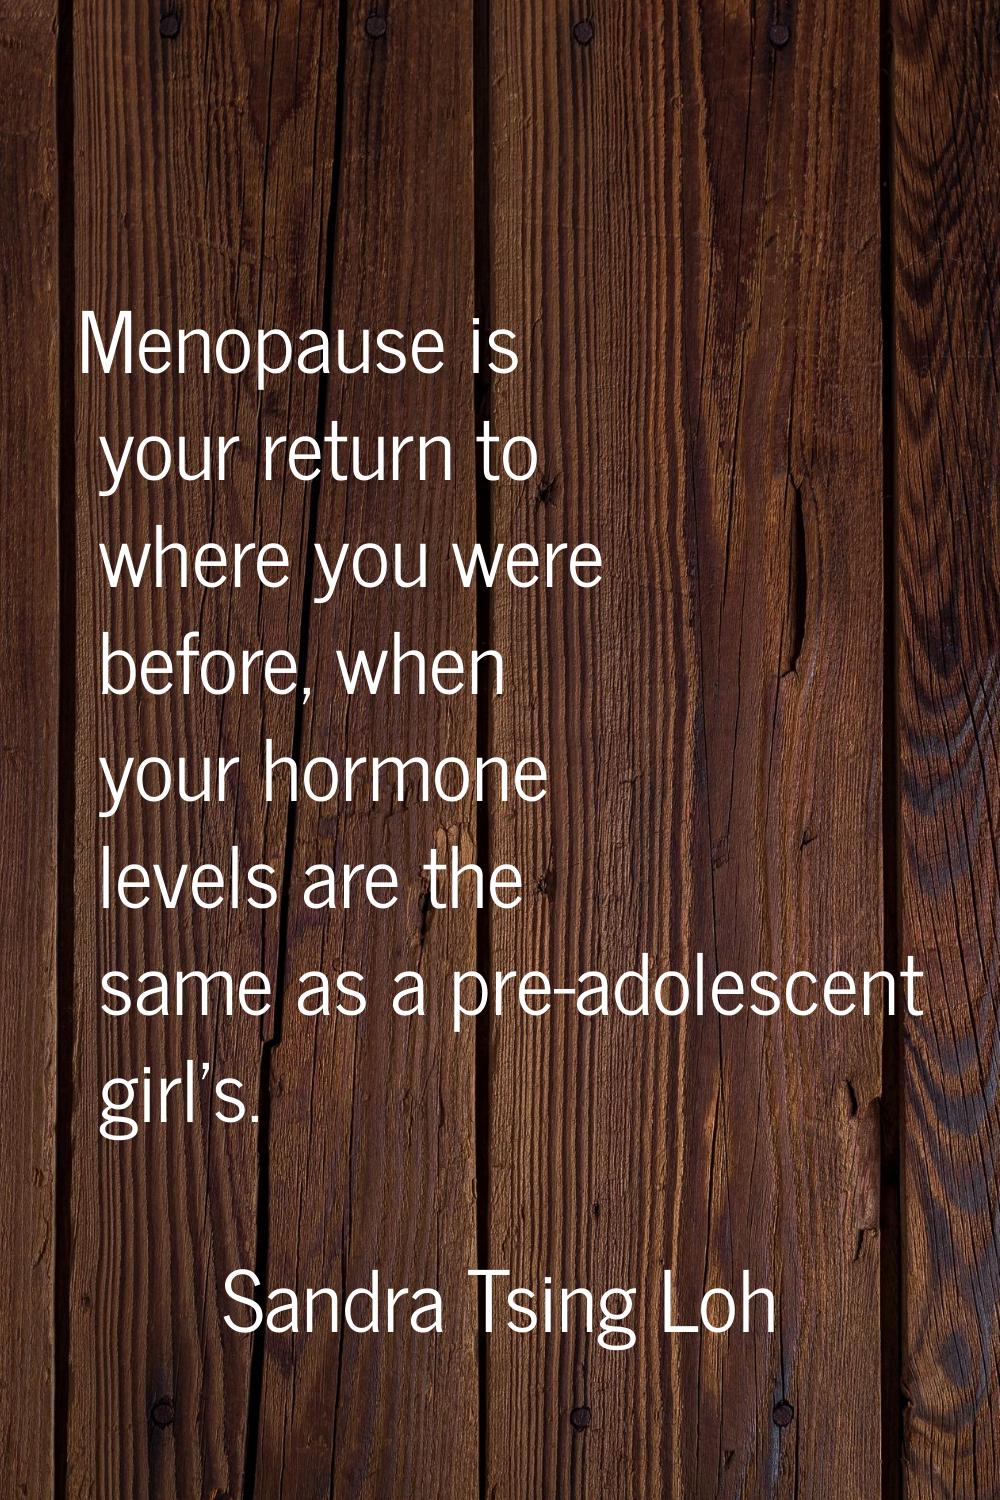 Menopause is your return to where you were before, when your hormone levels are the same as a pre-a